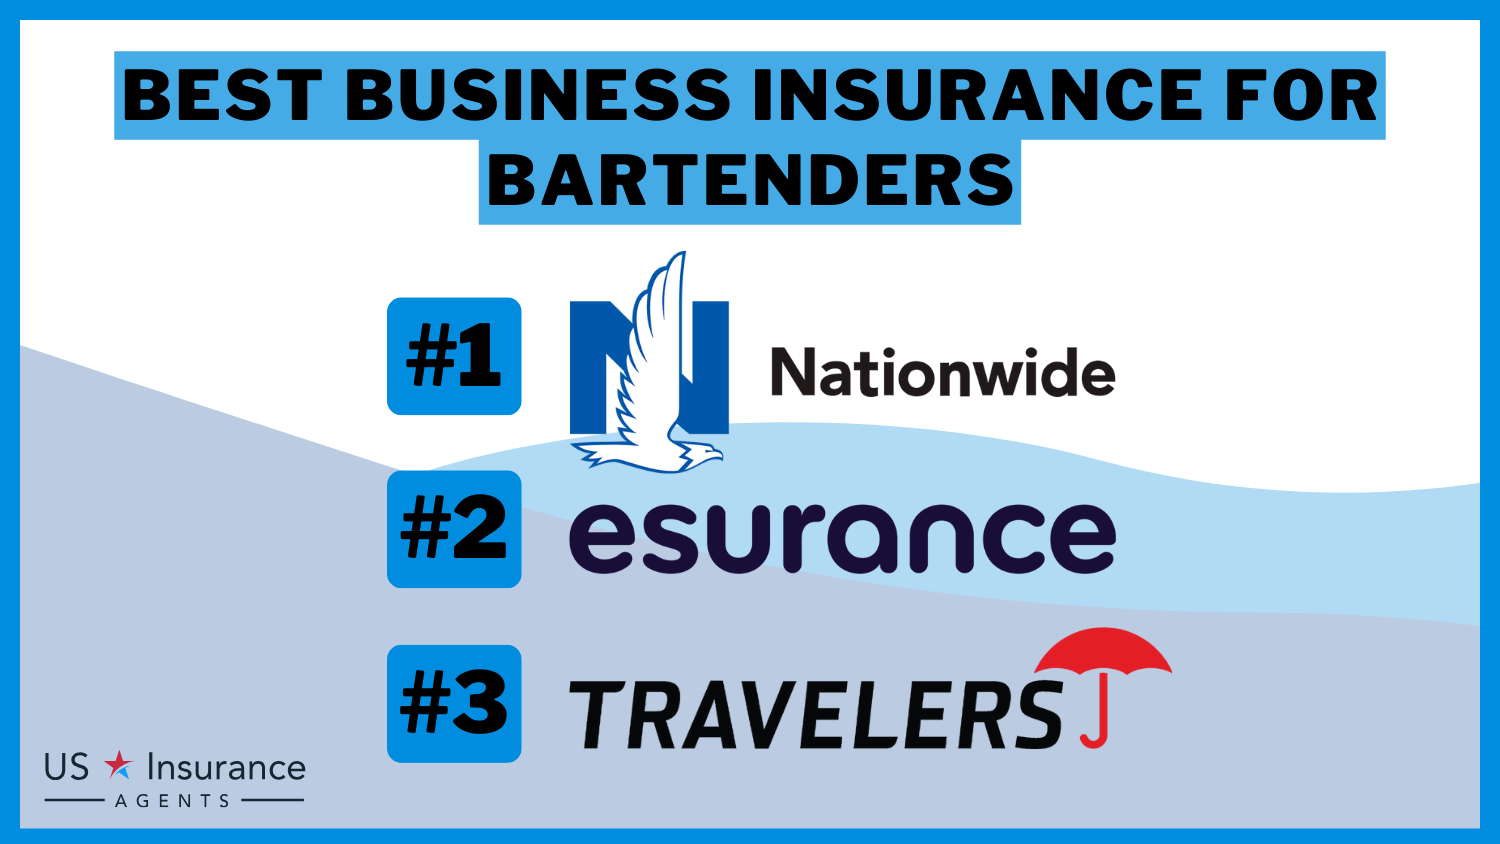 Best Business Insurance for Bartenders Nationwide, Esurance and Travelers.